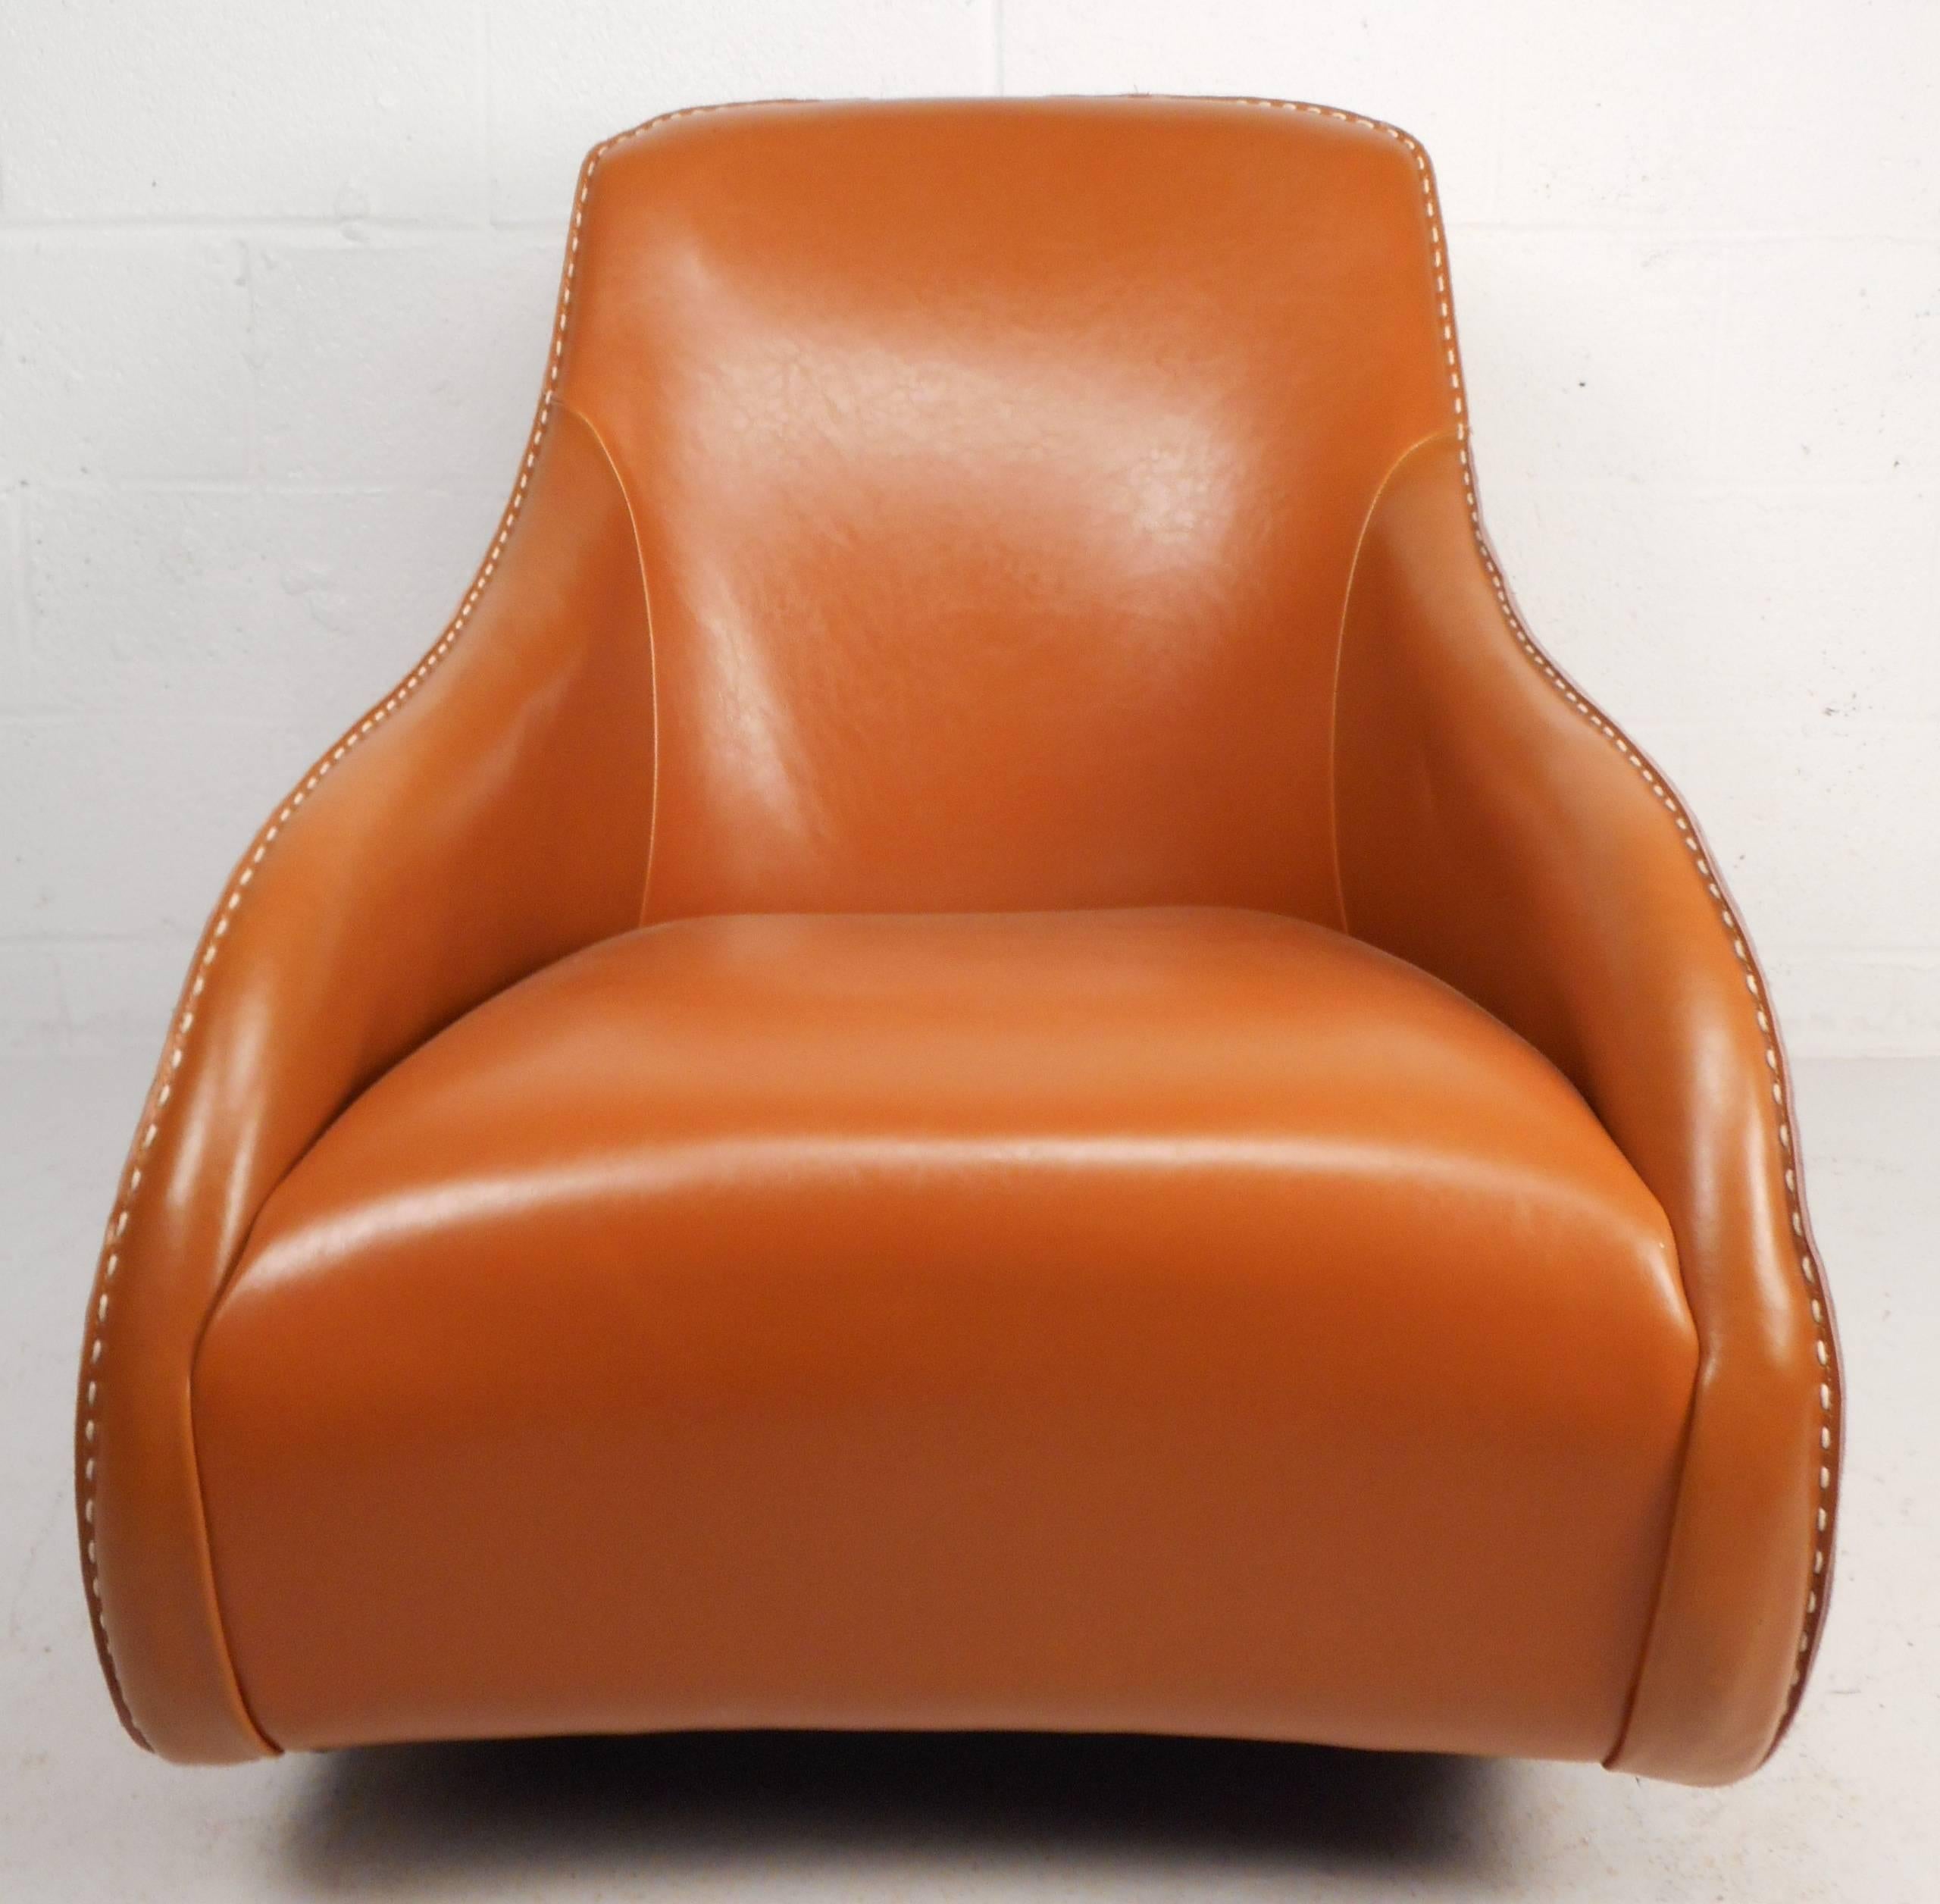 Beautiful contemporary modern rocking chair features a unique bucket seat design that's sure to provide comfort and style. Stunning piece is covered entirely in orange leather upholstery with stitched design running through each armrest and over the